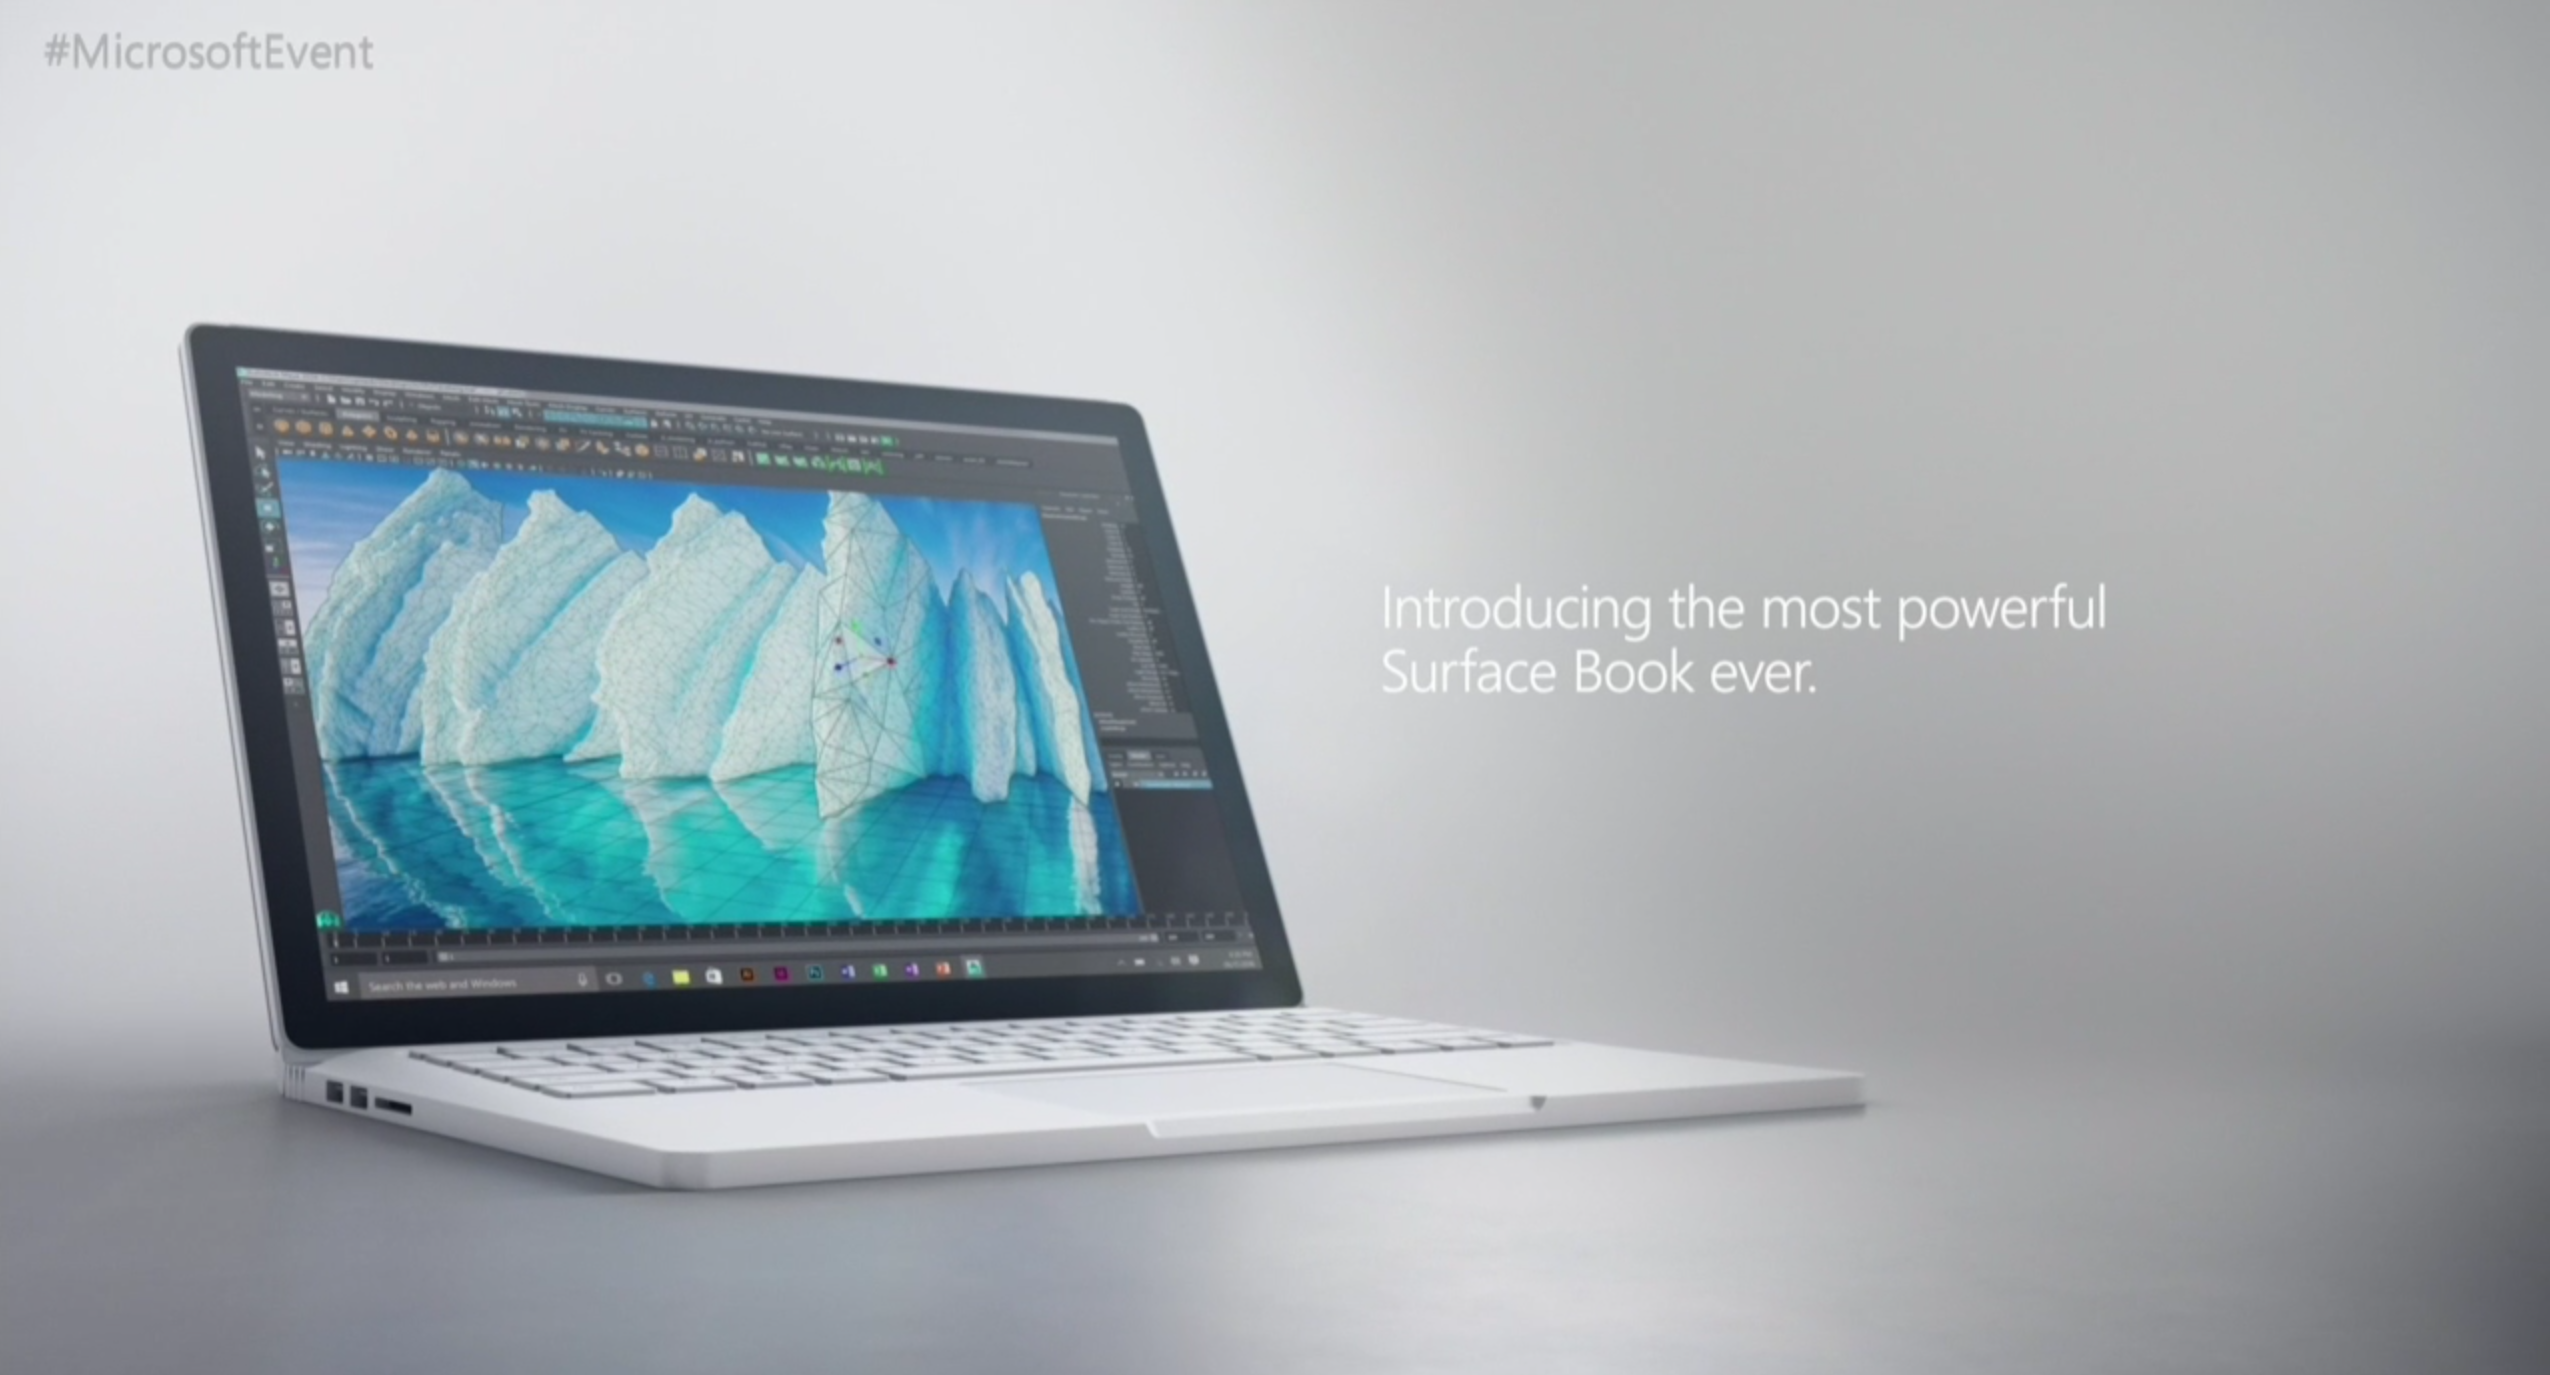 microsoft surface book 2016 goes super powerful increases battery life amps graphics image 1